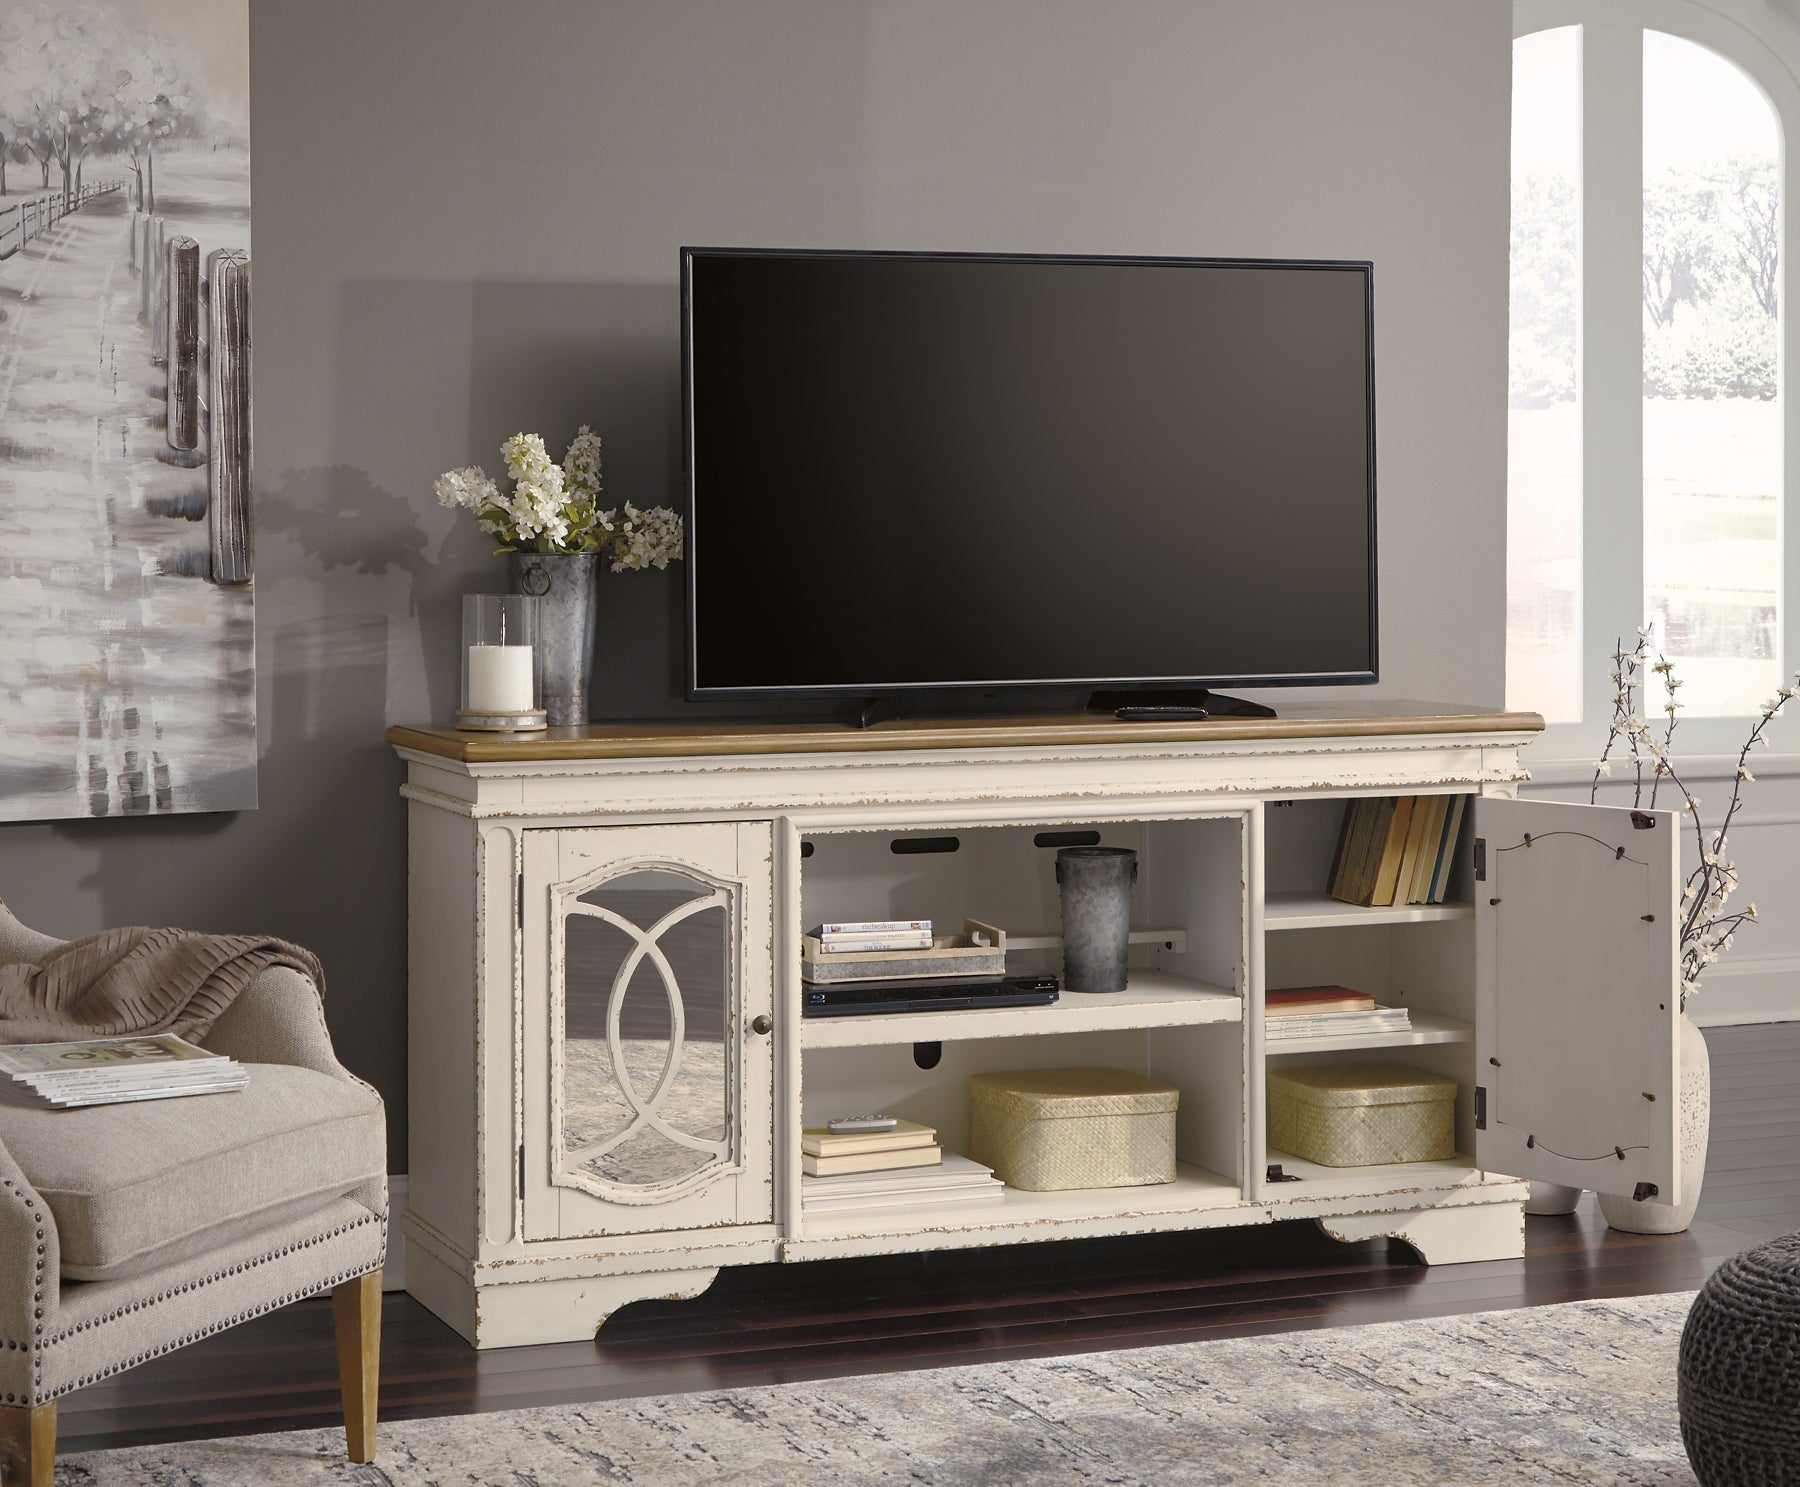 Realyn XL TV Stand w/Fireplace Option at Cloud 9 Mattress & Furniture furniture, home furnishing, home decor